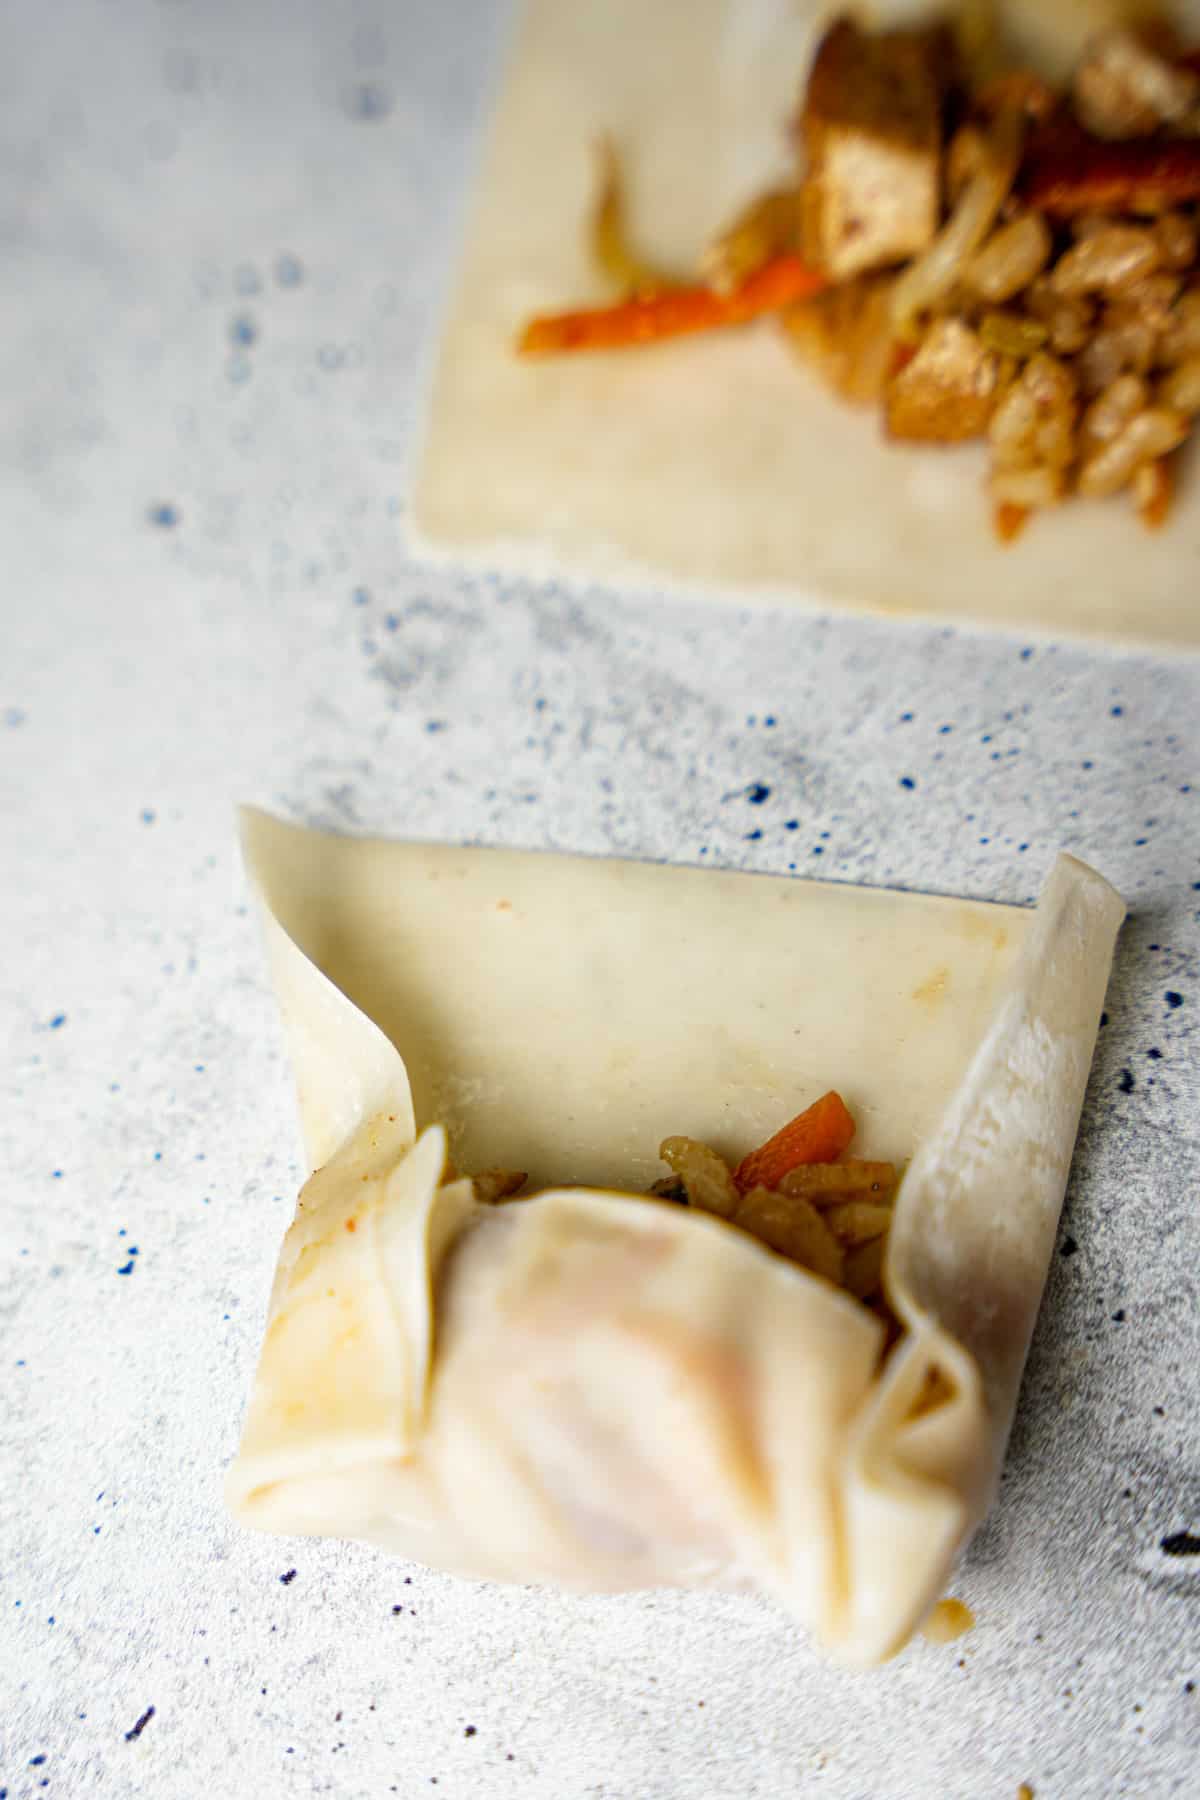 wonton is folded from the bottom and sides to form the rice dumplings.